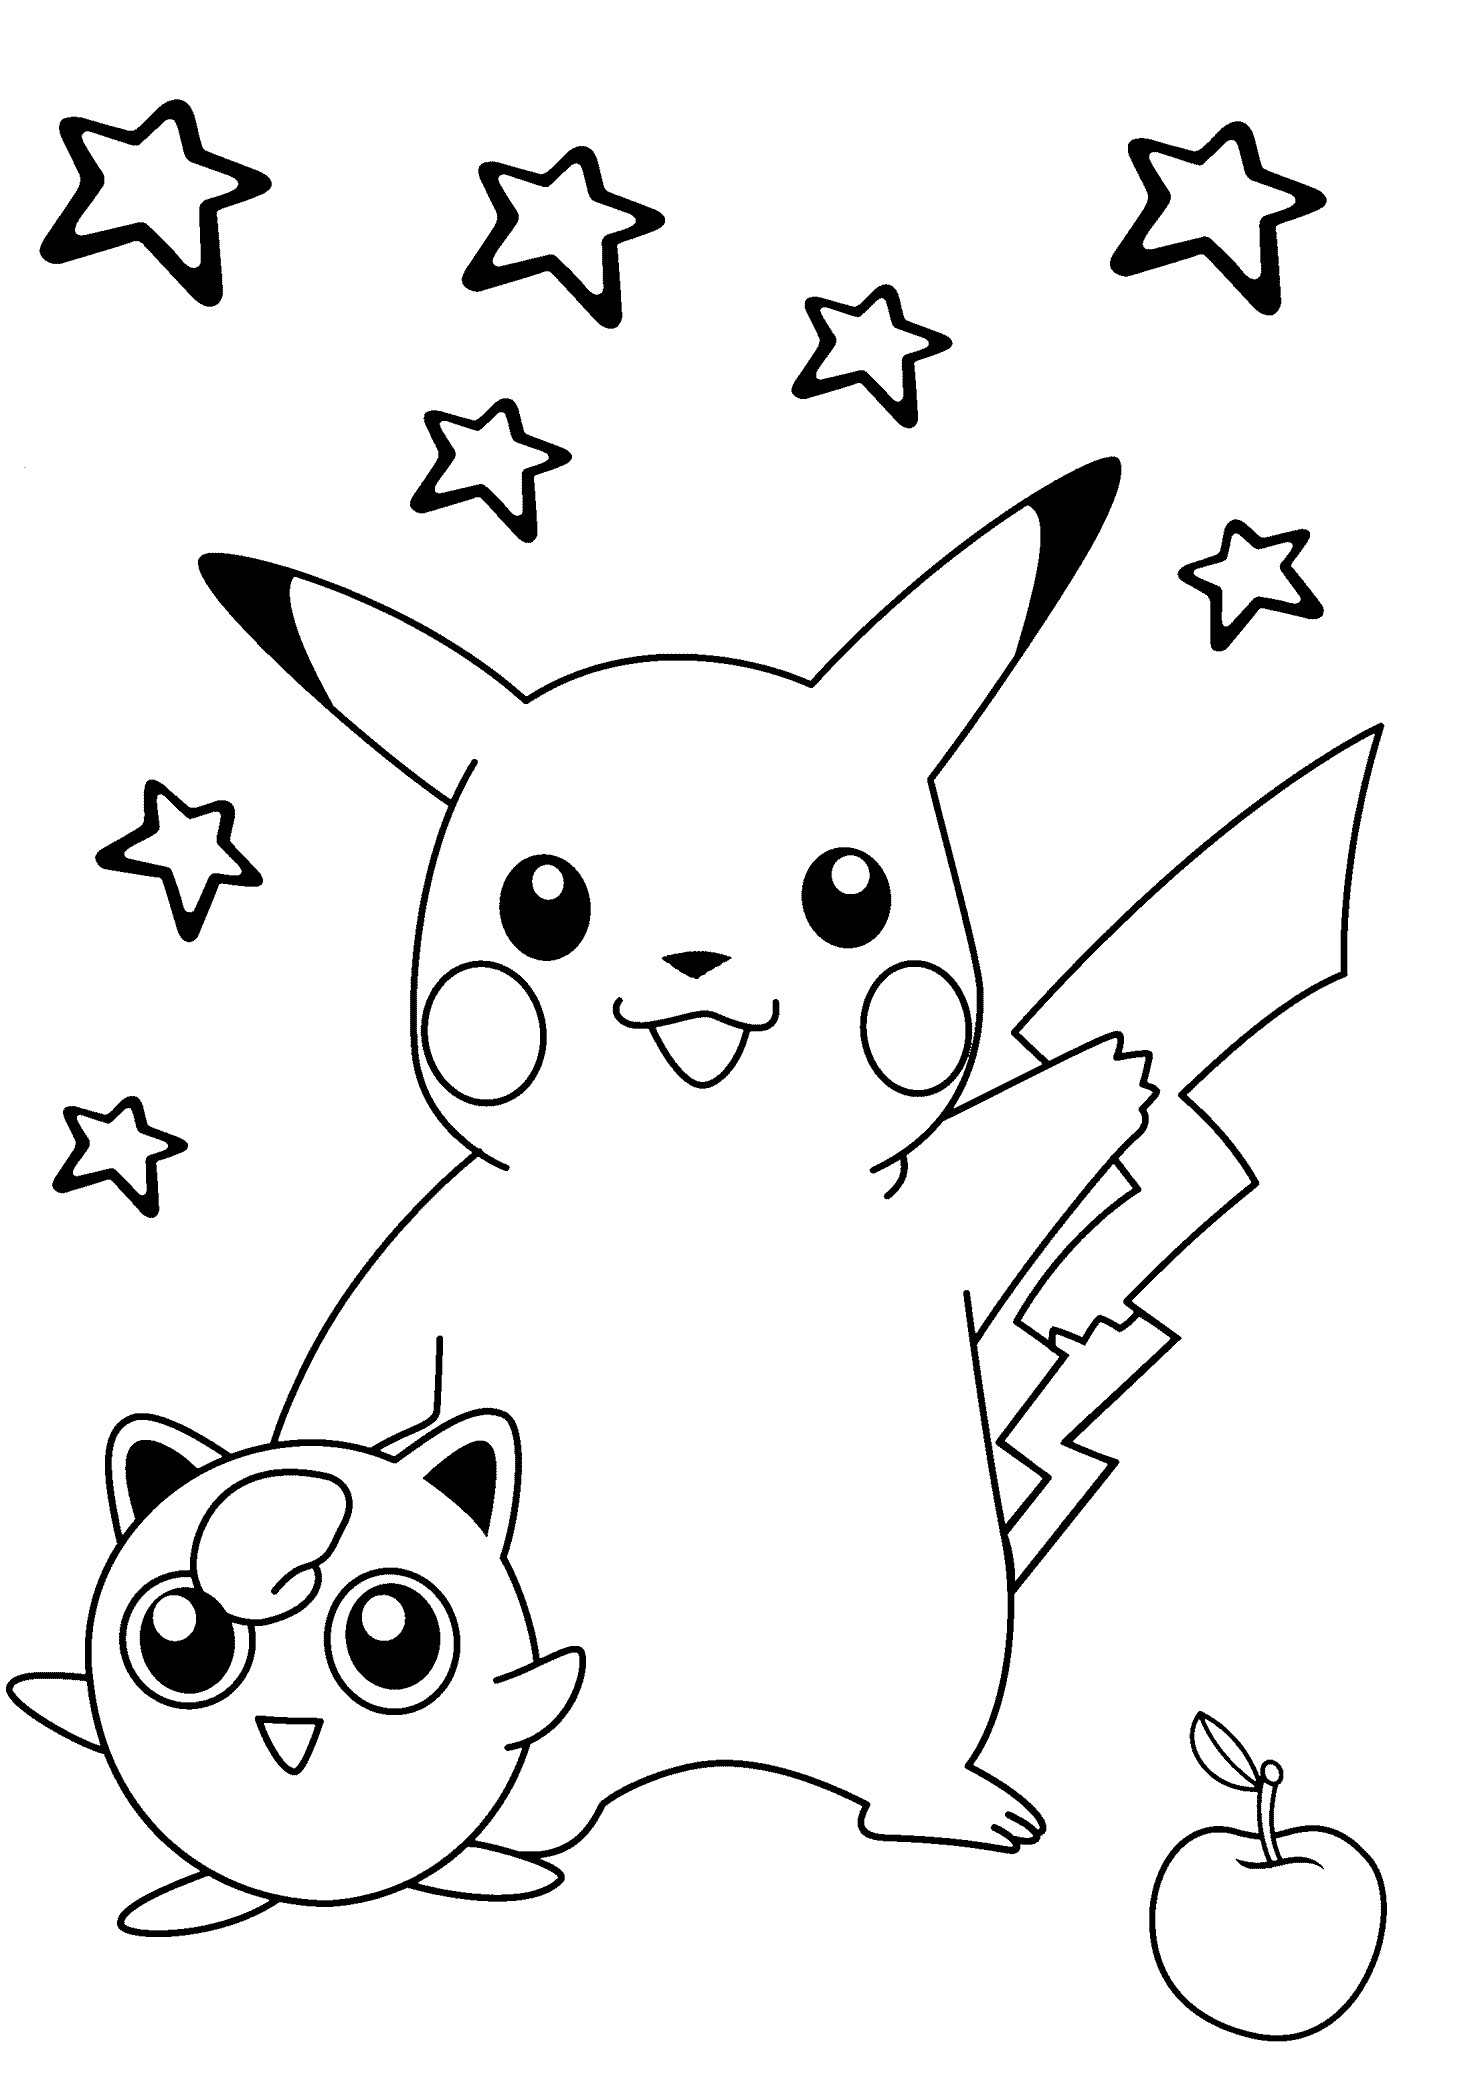 Pikachu Black and White Coloring Page Wallpaper